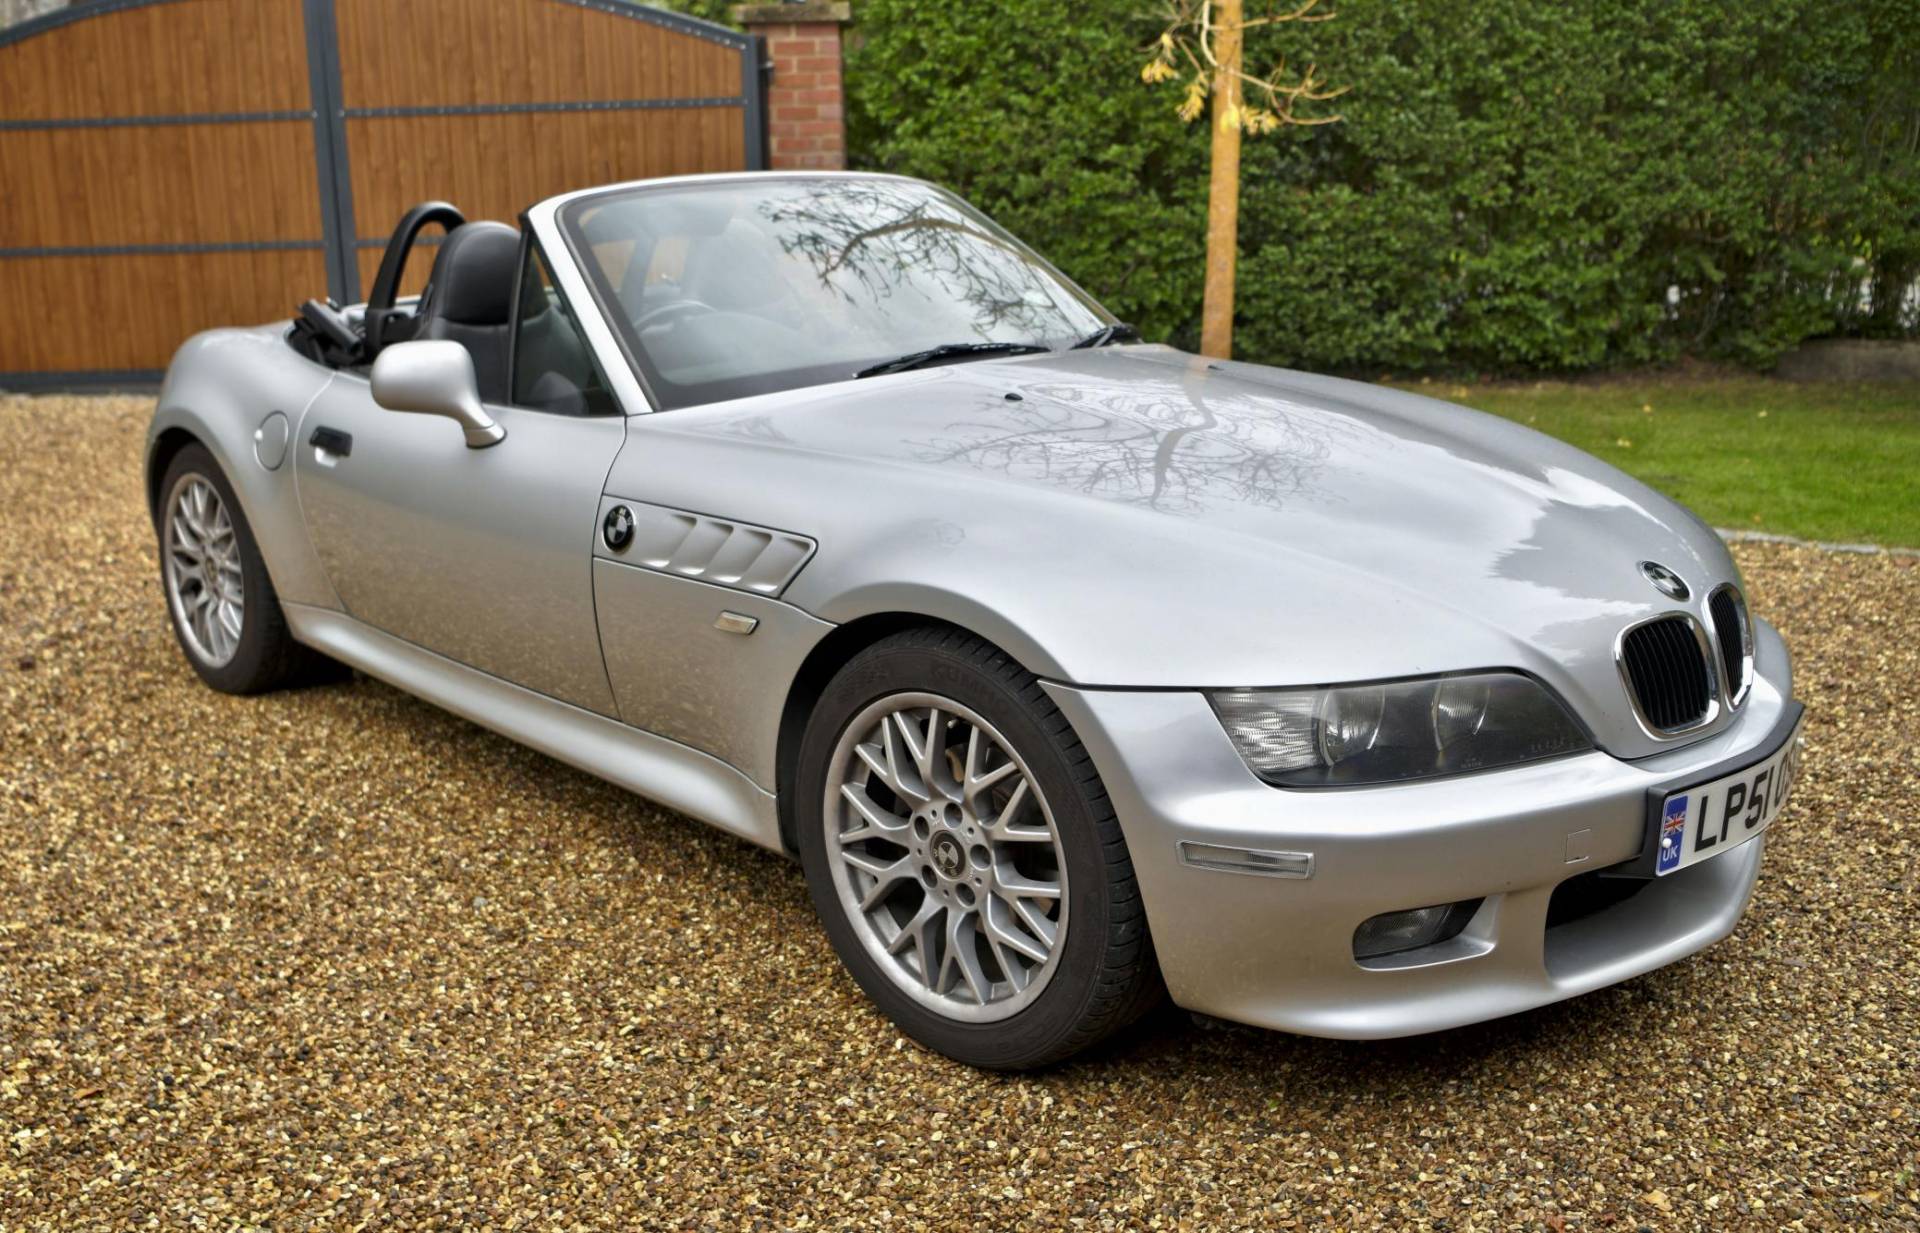 For Sale: BMW Z3 2.2i (2002) offered for £12,193